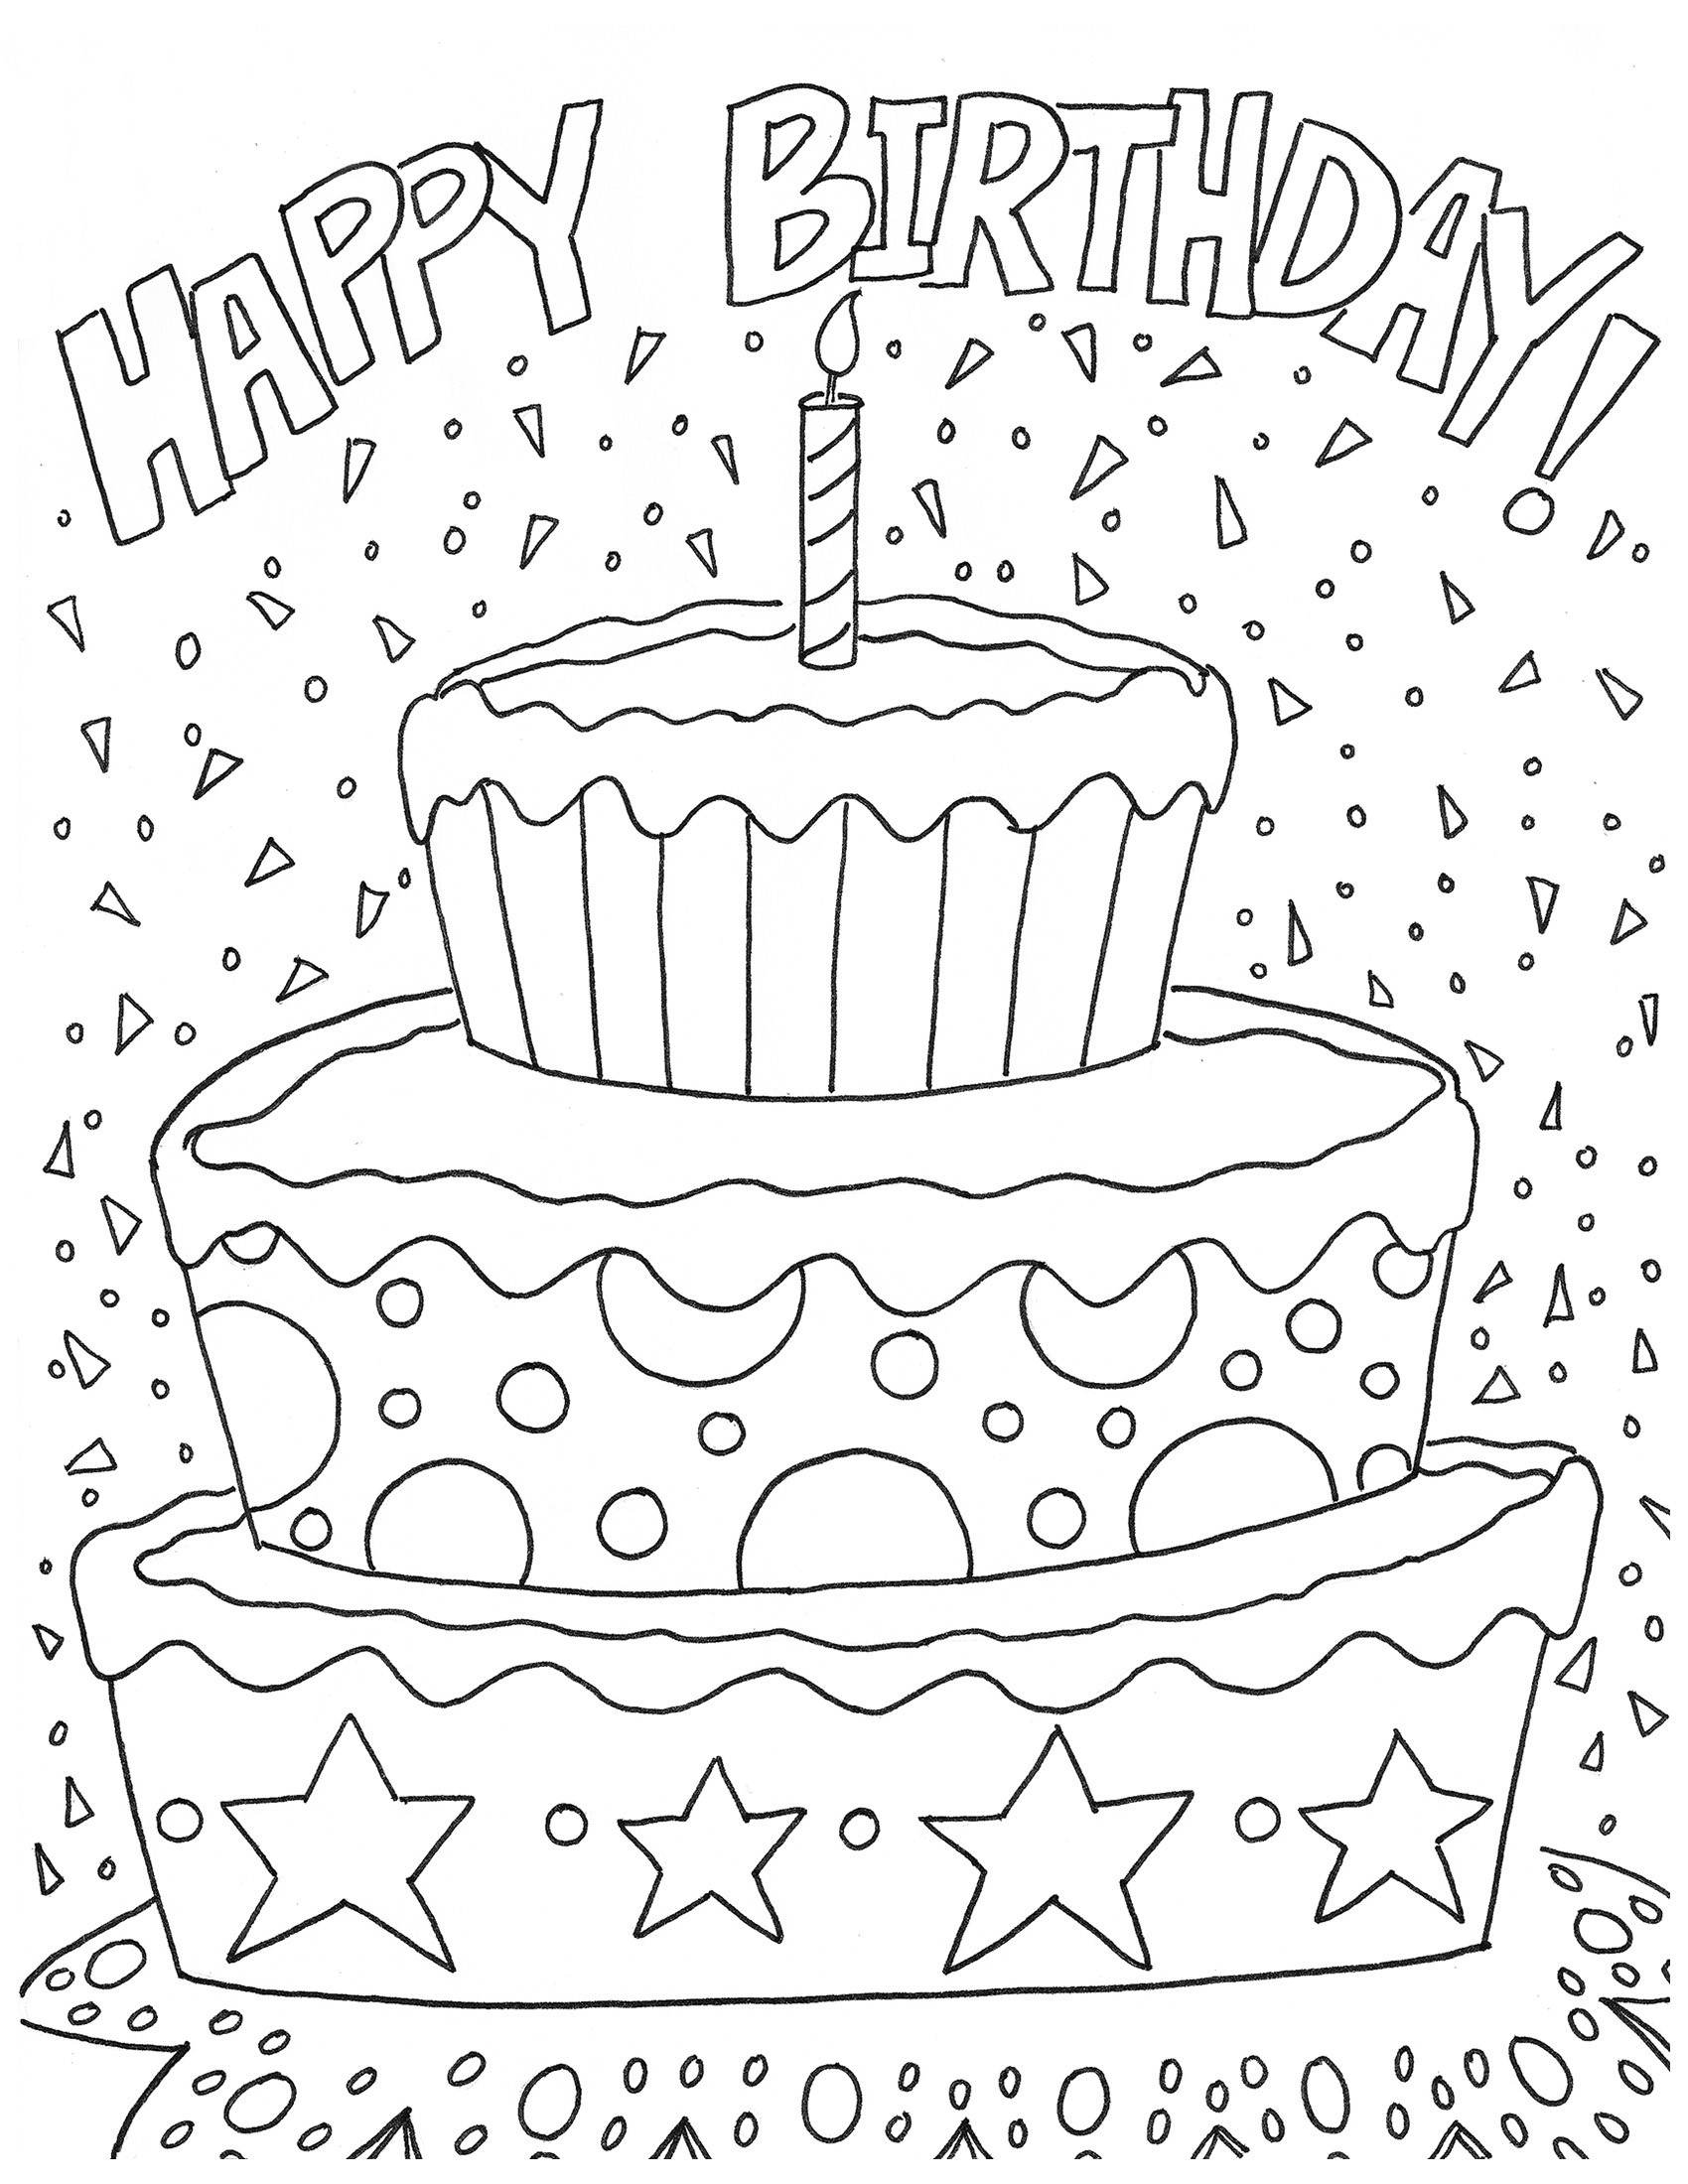 Happy Birthday Coloring Pages For Kids
 artzycreations A website on how to do it yourself